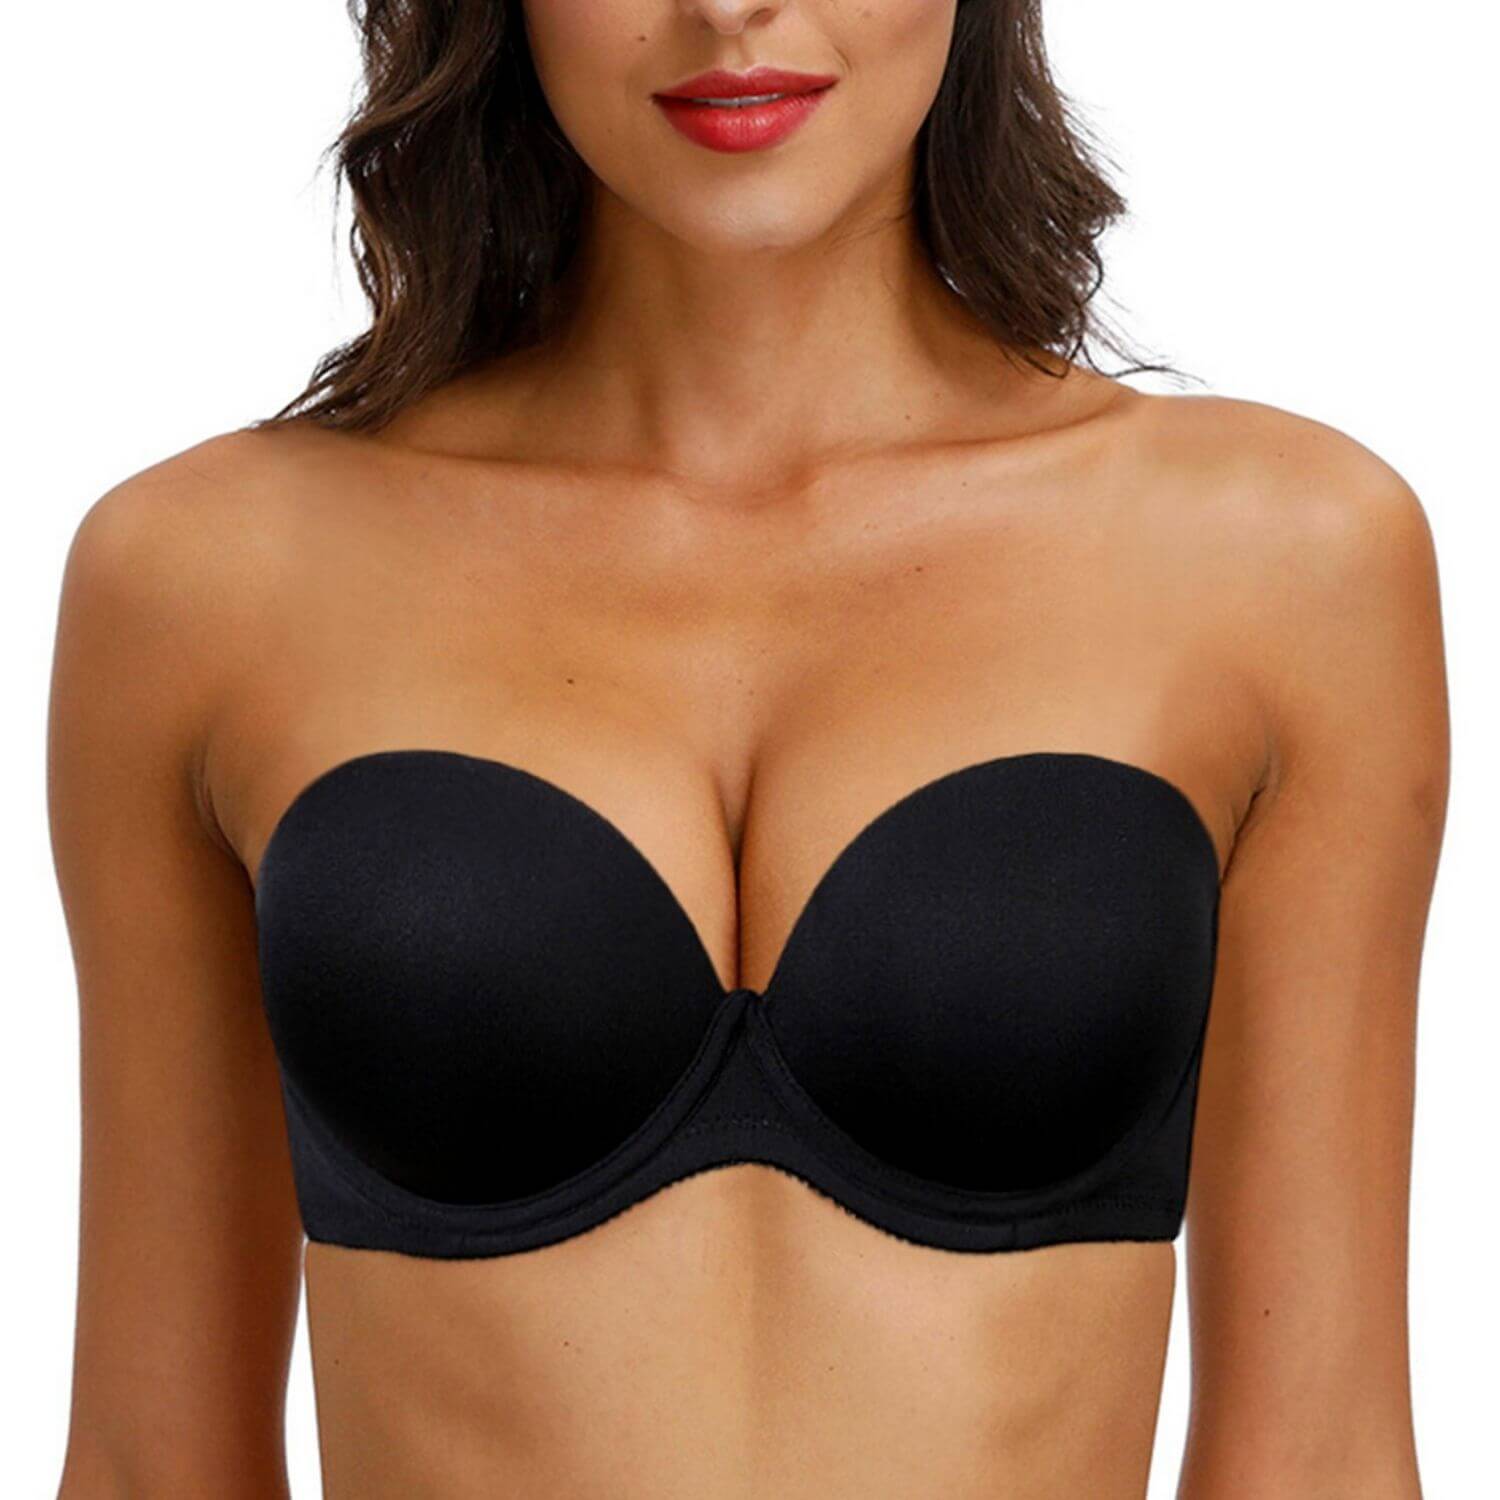 Strapless Bras For Every Occasion - Push Up, Supportive